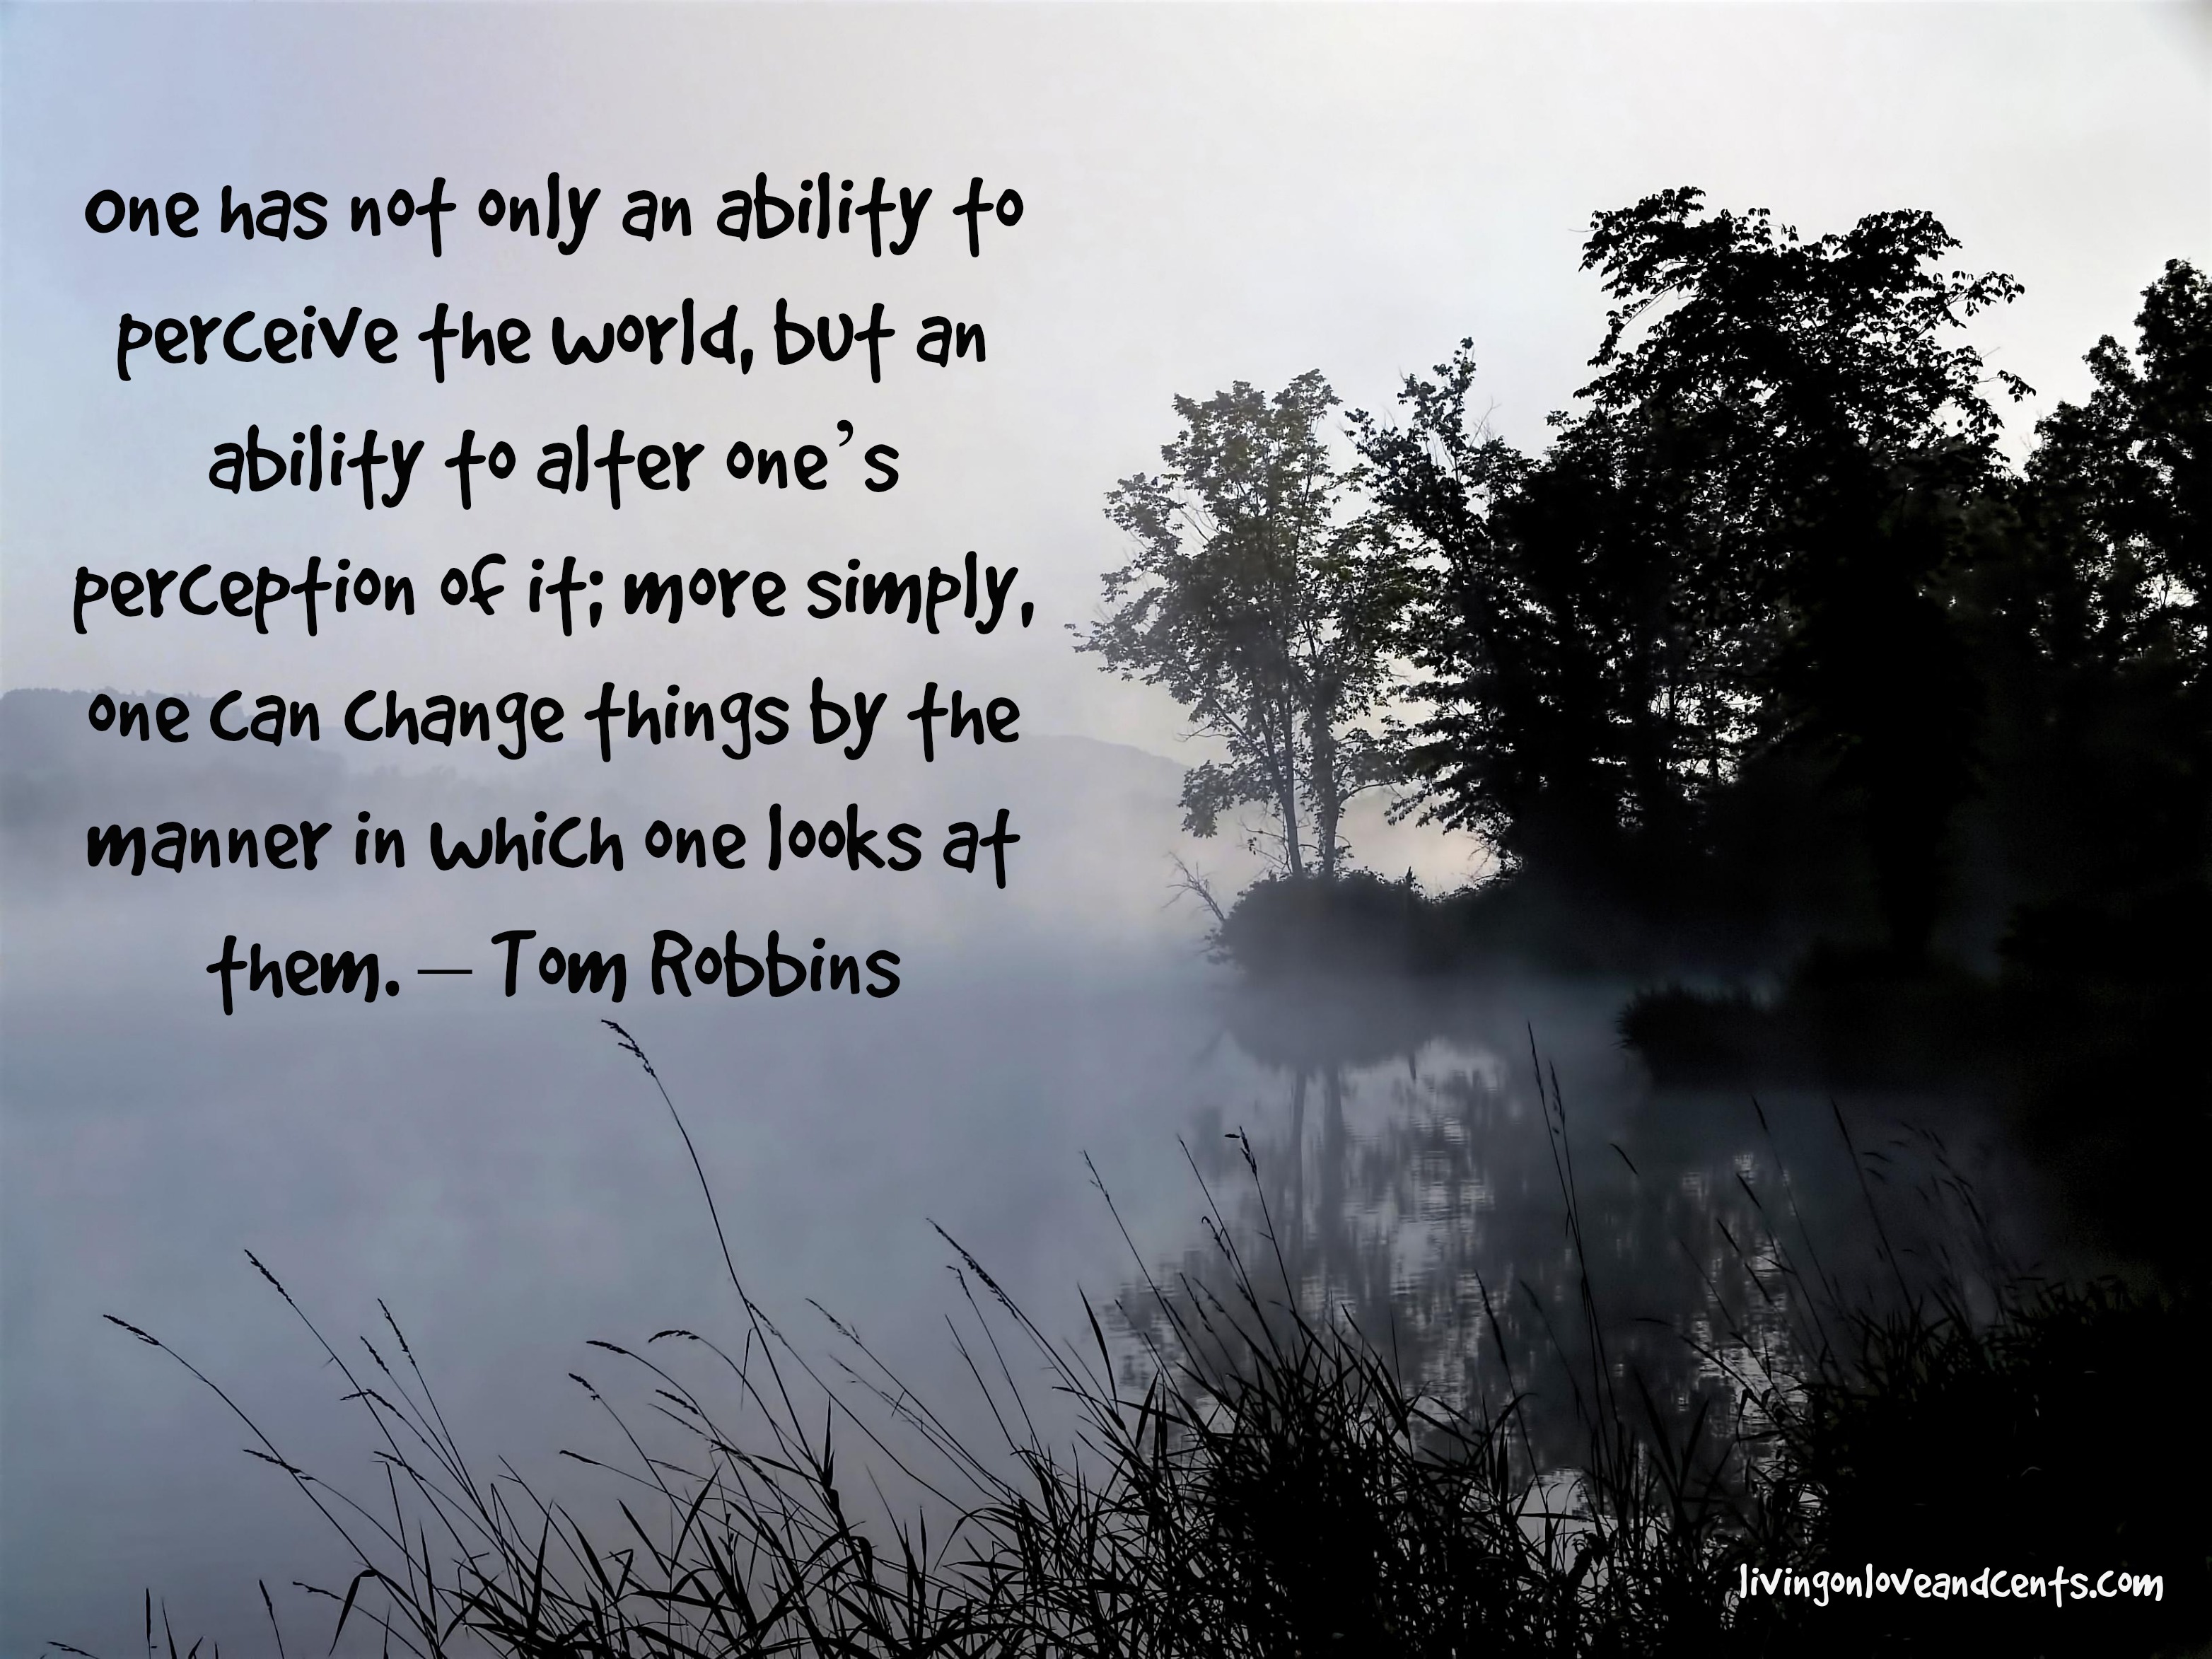 One has not only an ability to perceive the world, but an ability to alter one's perception of it more simply, one can change things by the manner in which one ... Tom RObbins